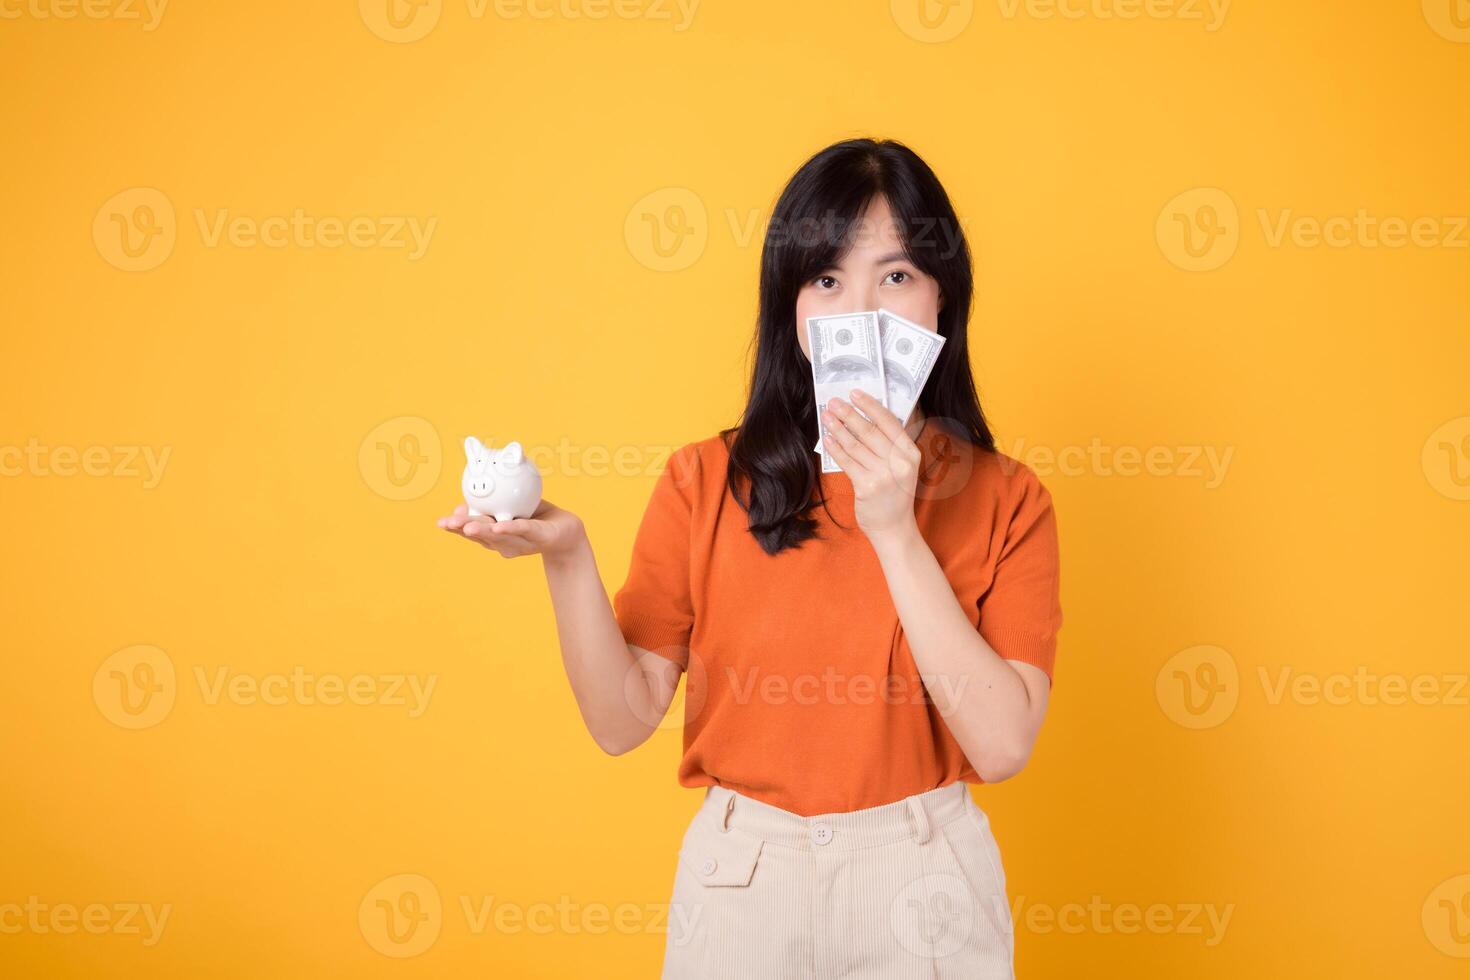 Joyful Asian woman in her 30s kisses piggy bank, holds cash money dollars on vibrant yellow background. Wealth saving concept. photo